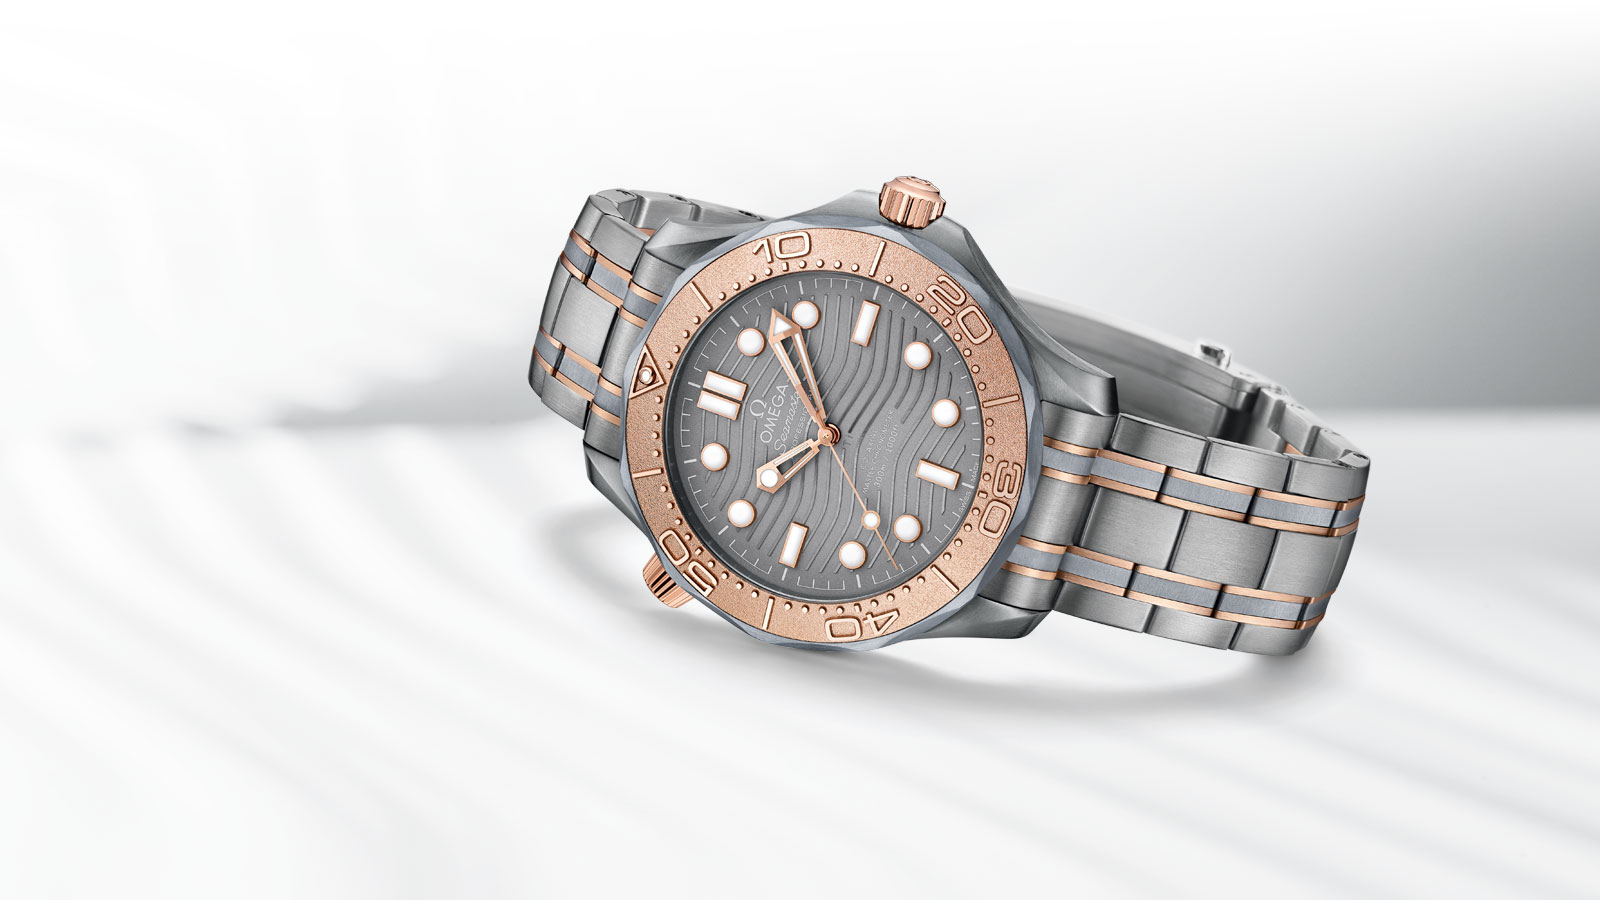 Seamaster Diver 300M limited edition